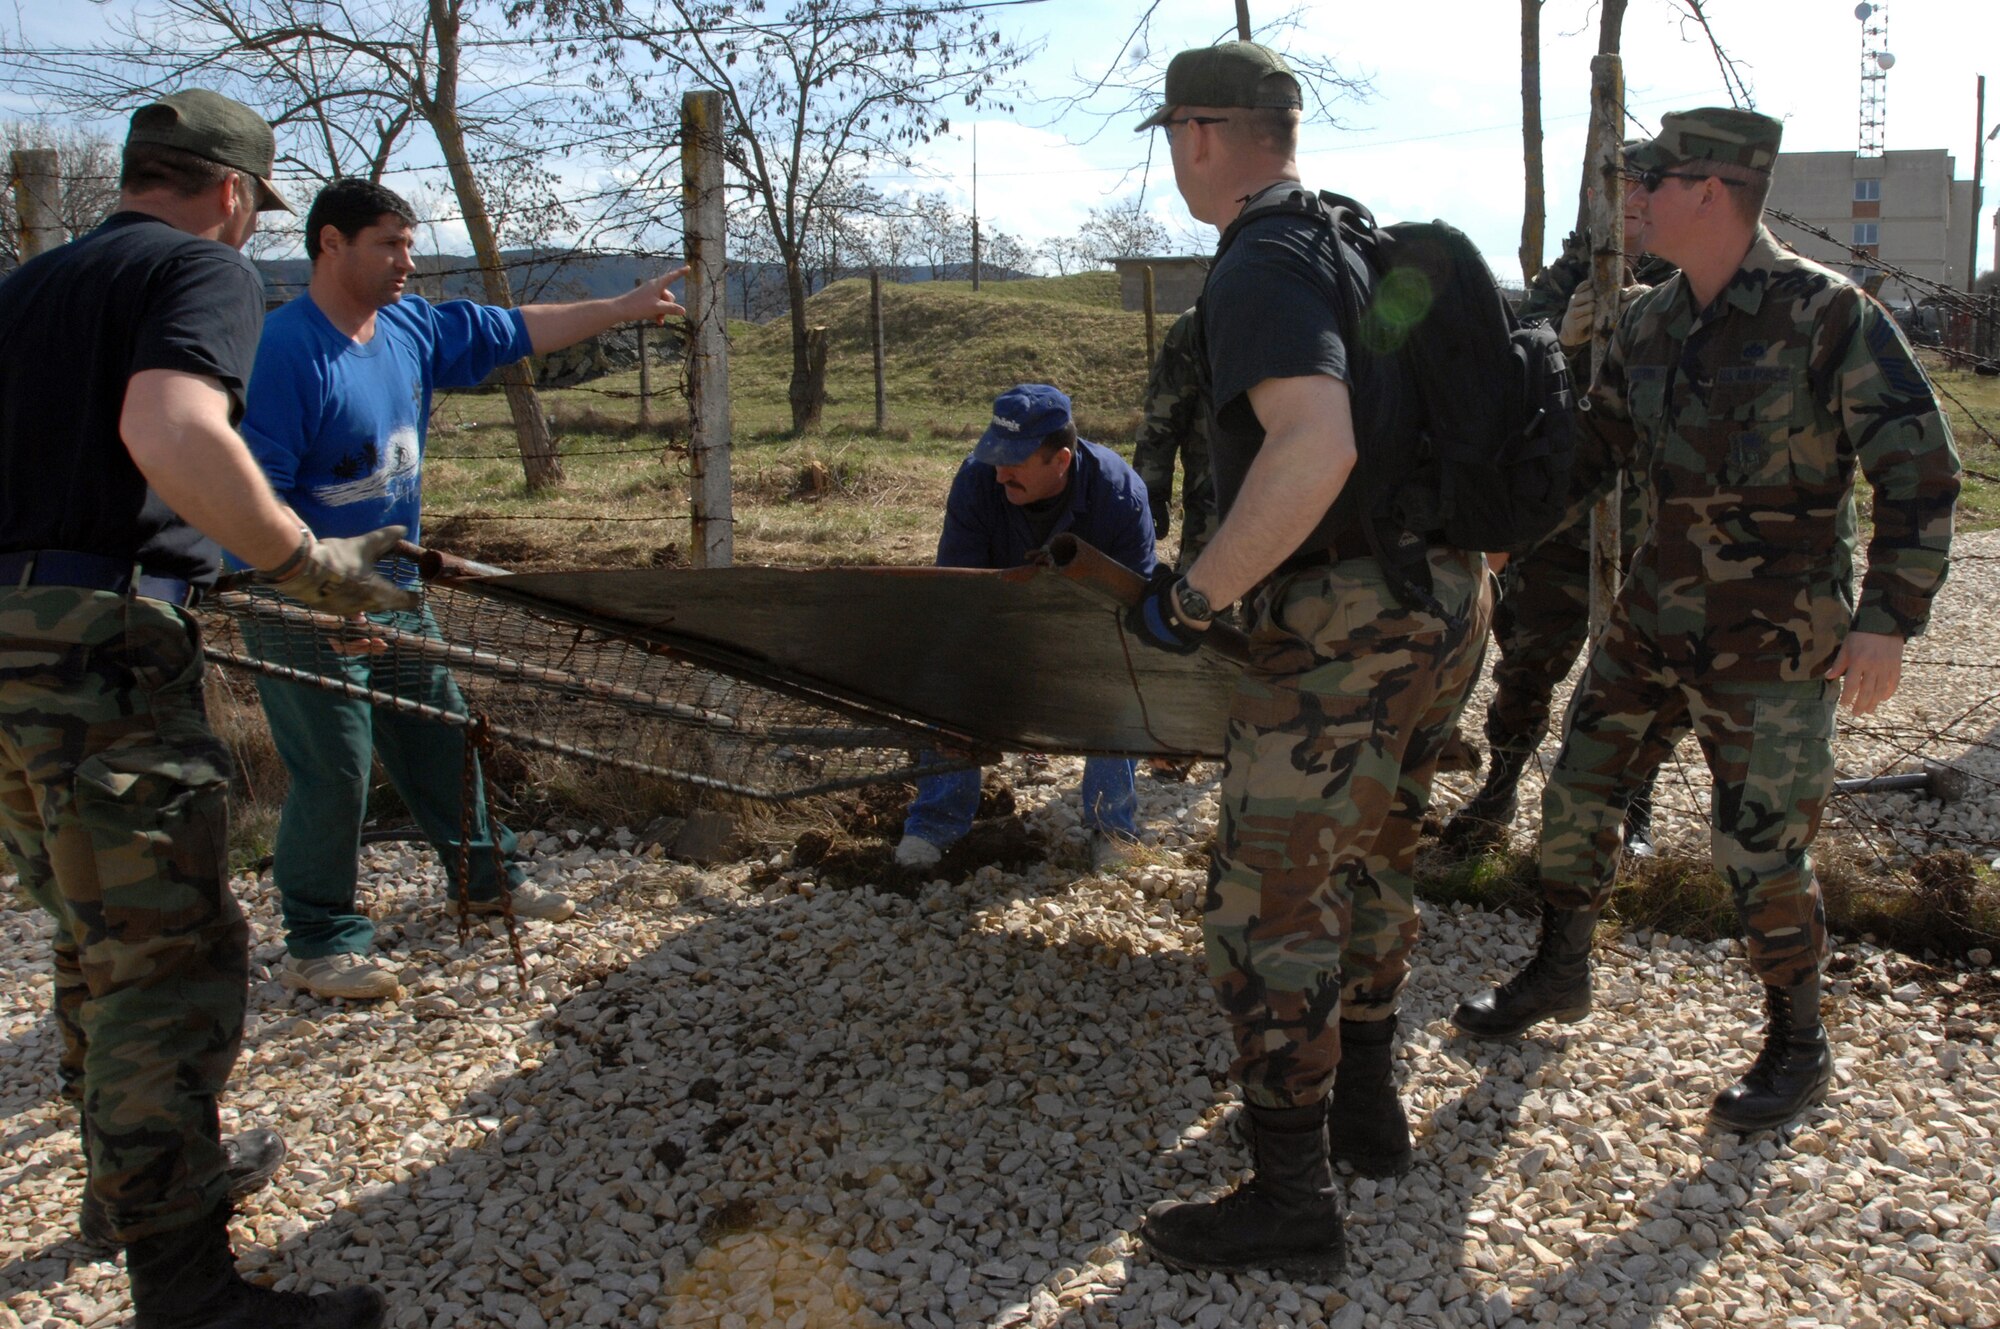 CAMPIA TURZII, Romania -- Members of the 404 Expeditionary Air Base Squadron work with Romanian nationals in removing the gate that divided the Romania base from the tent city here March 24, 2008. The deployed civil engineering team built an entire tent city here in 96 hours to support U.S. operations at the air base.  The Airmen are part of a team which is augmenting NATO forces in securing the airspace around Bucharest, Romania, for the NATO Summit April 2-4,  (U.S Air Force photo by Senior Airman Teresa M. Hawkins)
